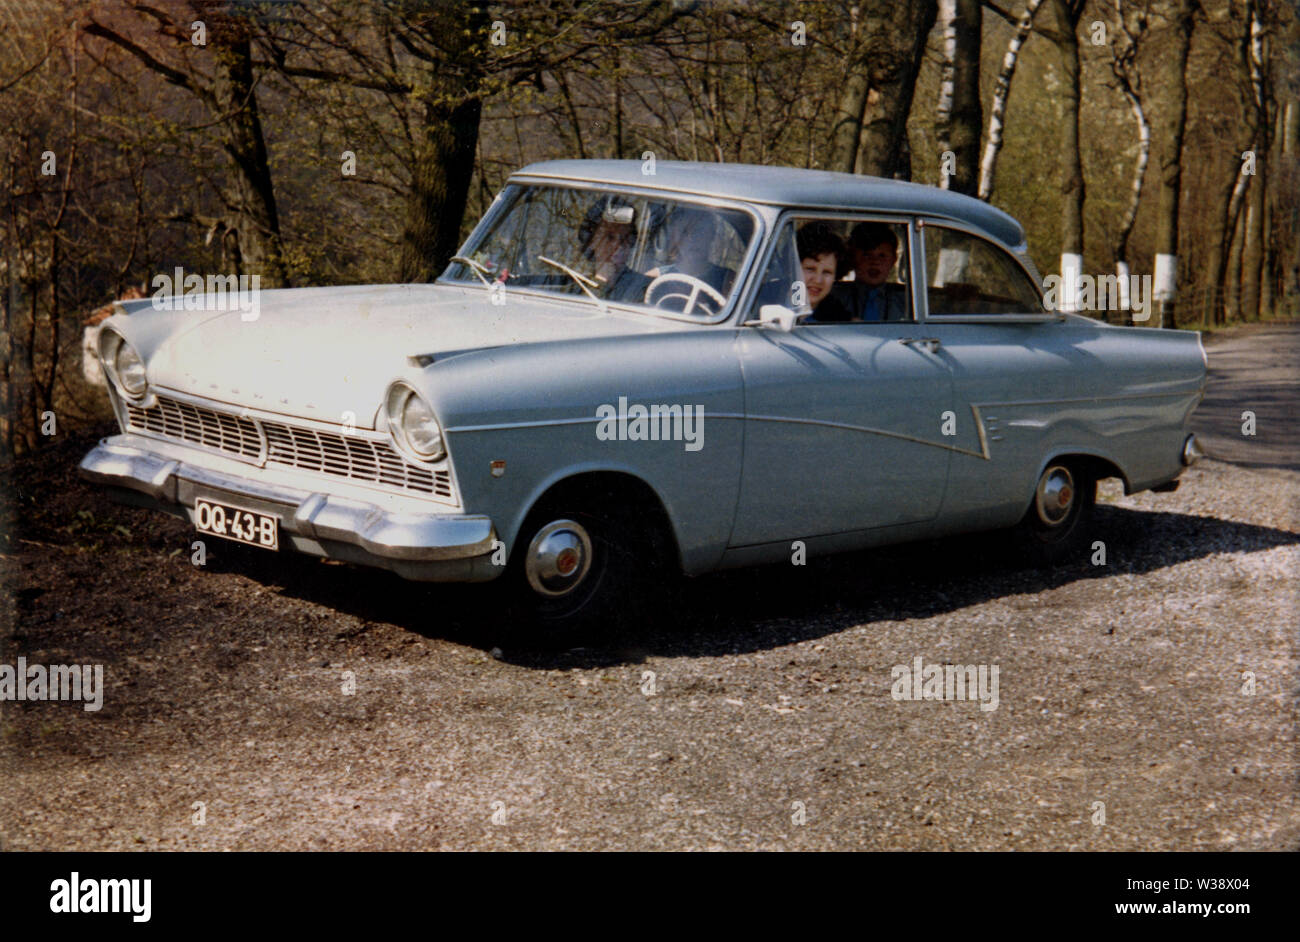 1960, historical, people sitting in a Ford Taunus P2 (17M) motor car parked beside some woodland. Similar to the UK's Ford Cortina. the Taunus was made by Ford Germany and sold throughout Europe. The stylish  car was named after the Taunus mountain range in Germany and was the second newly-designed German Ford to be launched after the war. Stock Photo